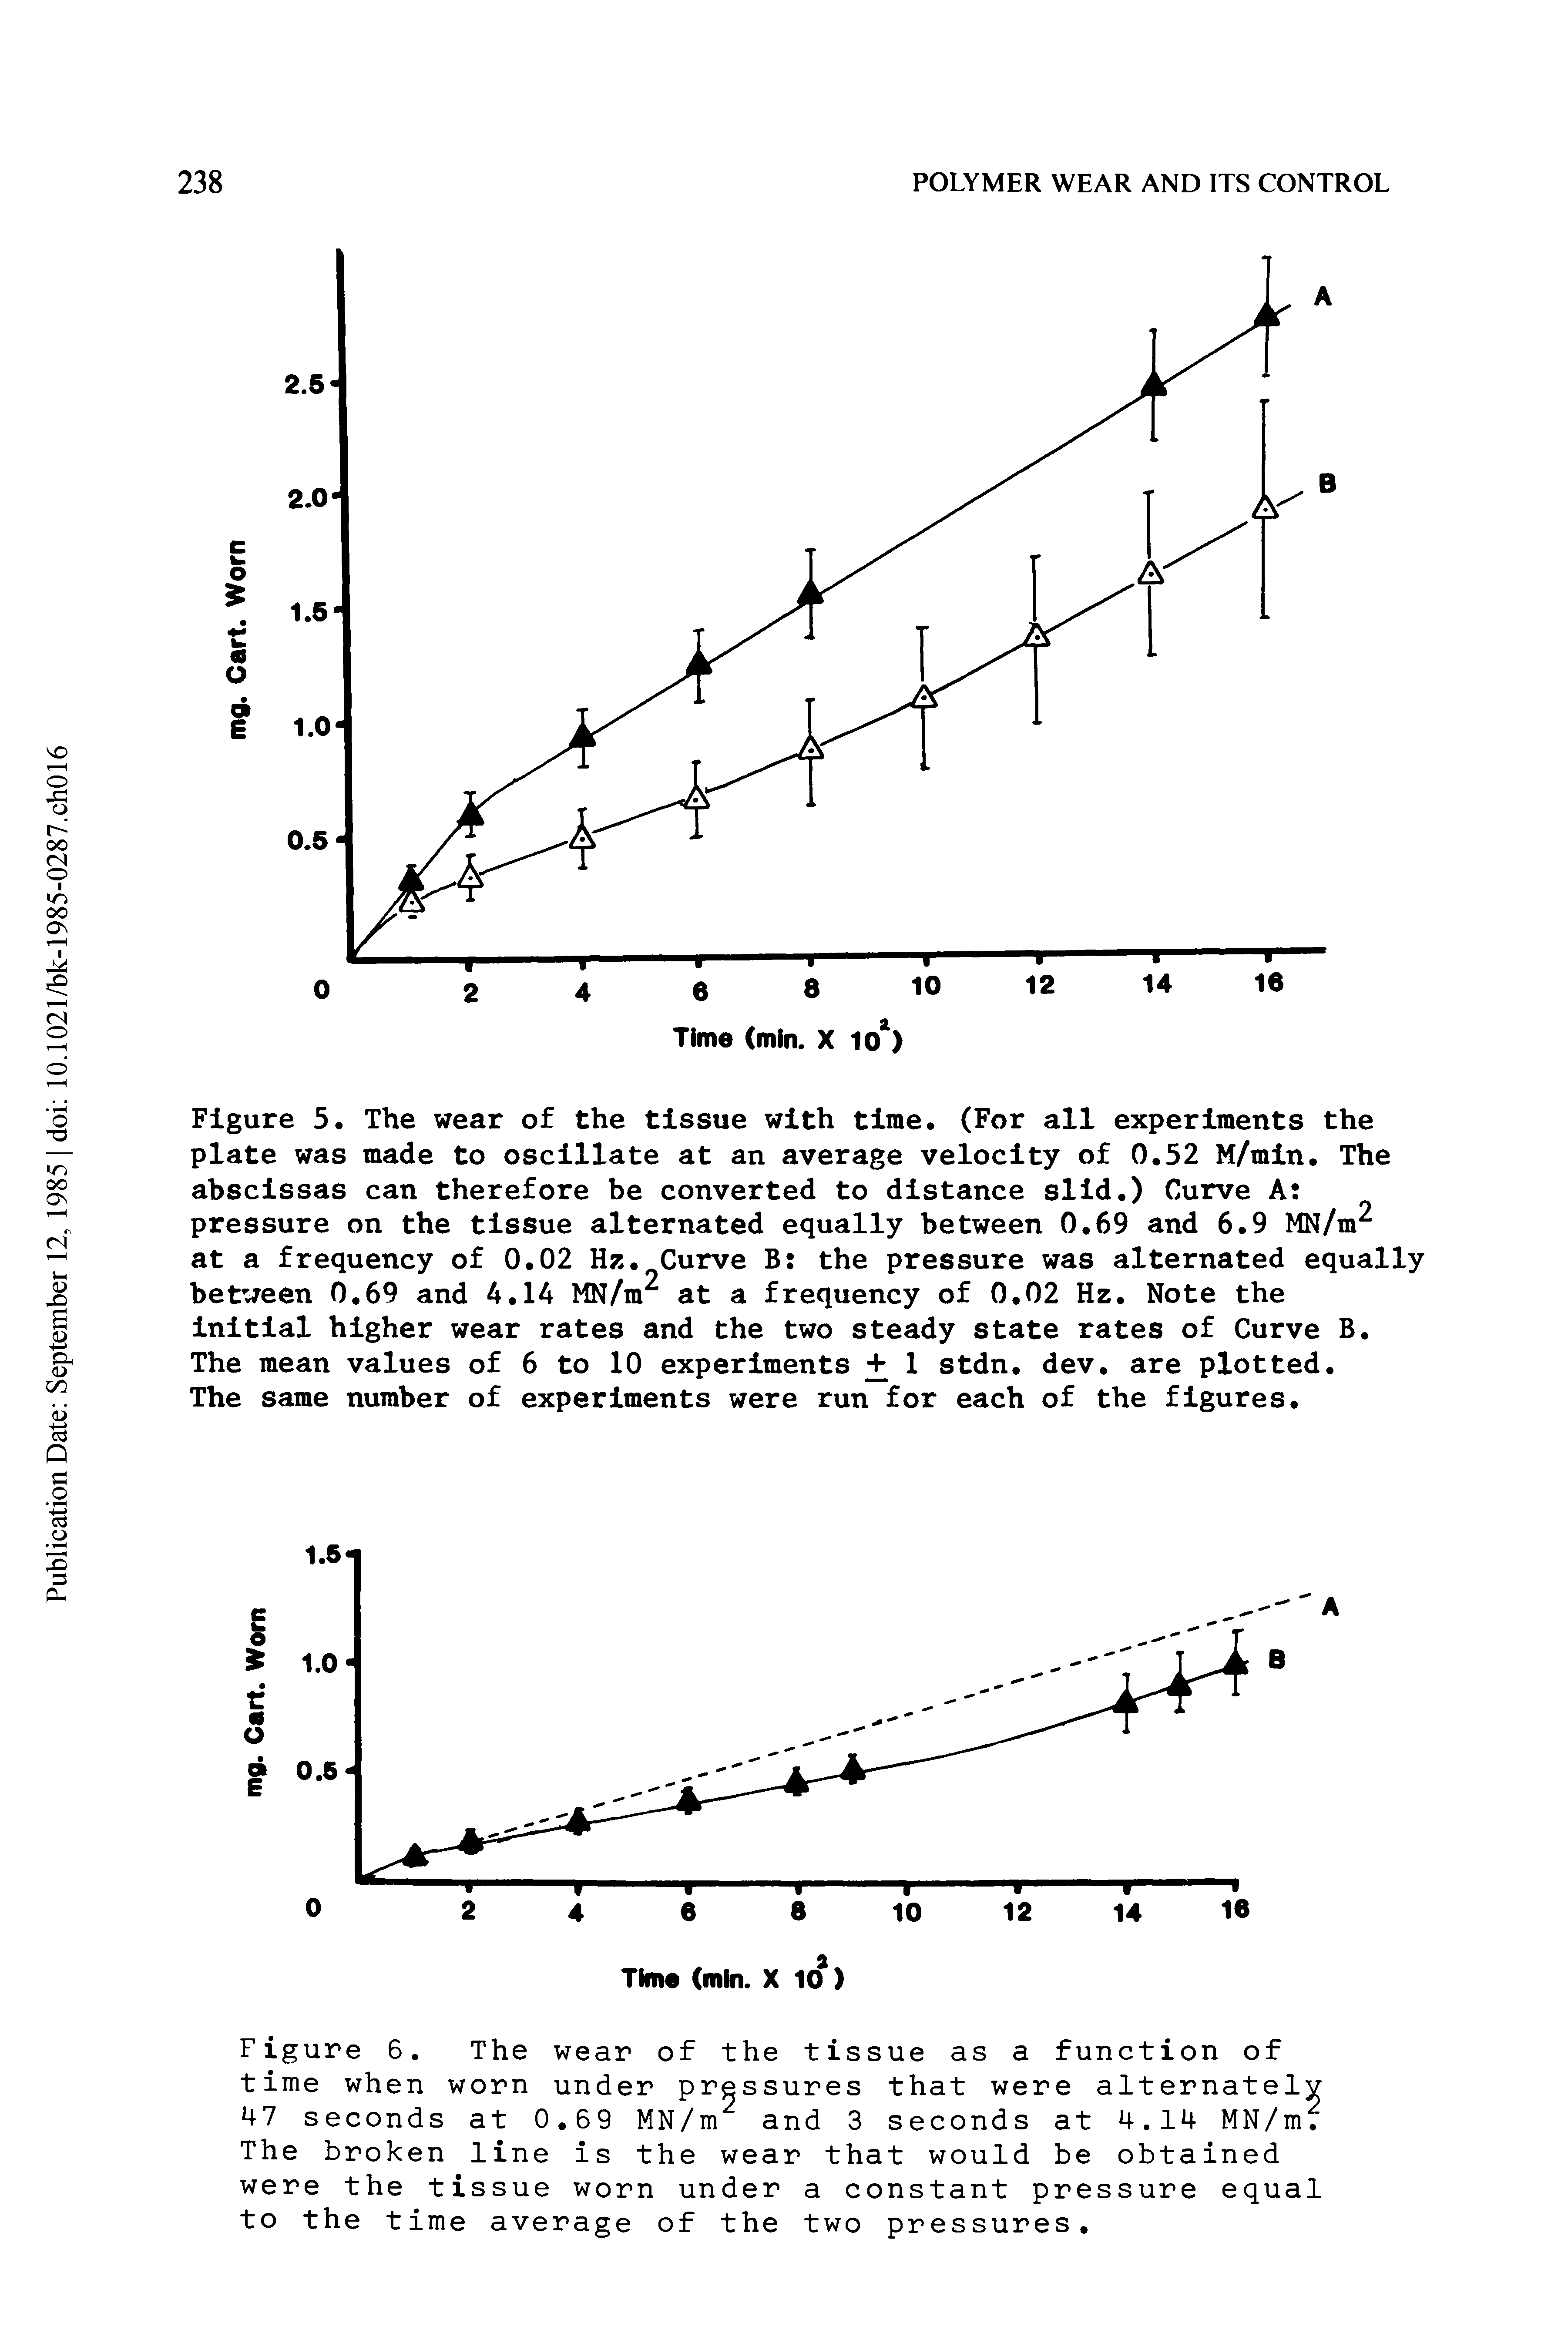 Figure 5. The wear of the tissue with time (For all experiments the plate was made to oscillate at an average velocity of 0.52 M/min. The abscissas can therefore be converted to distance slid.) Curve A pressure on the tissue alternated equally between 0.69 and 6.9 MN/m at a frequency of 0.02 Hz. Curve B the pressure was alternated equally between 0.69 and 4.14 MN/m at a frequency of 0.02 Hz. Note the initial higher wear rates and the two steady state rates of Curve B.